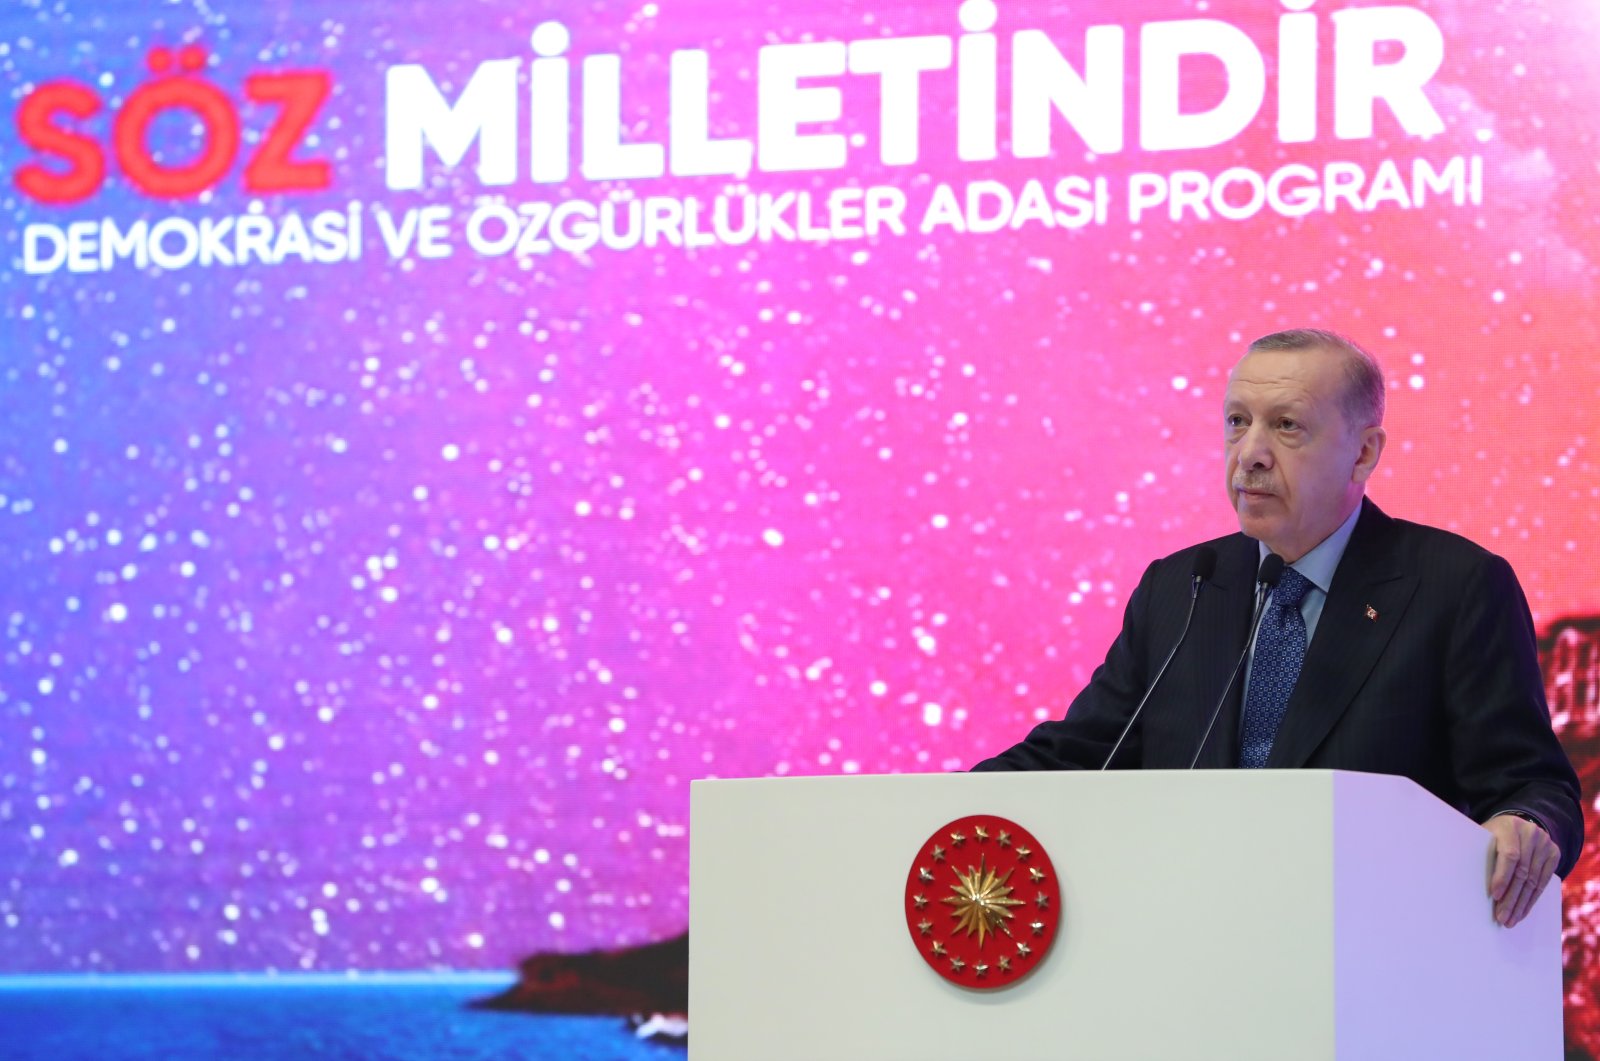 President Recep Tayyip Erdoğan speaks at an event on Istanbul&#039;s Democracy and Freedom Island (formerly known as Yassıada) on the occasion of the 62nd anniversary of the military takeover of May 27, 1960, Turkey, May 27, 2022. (DHA Photo)